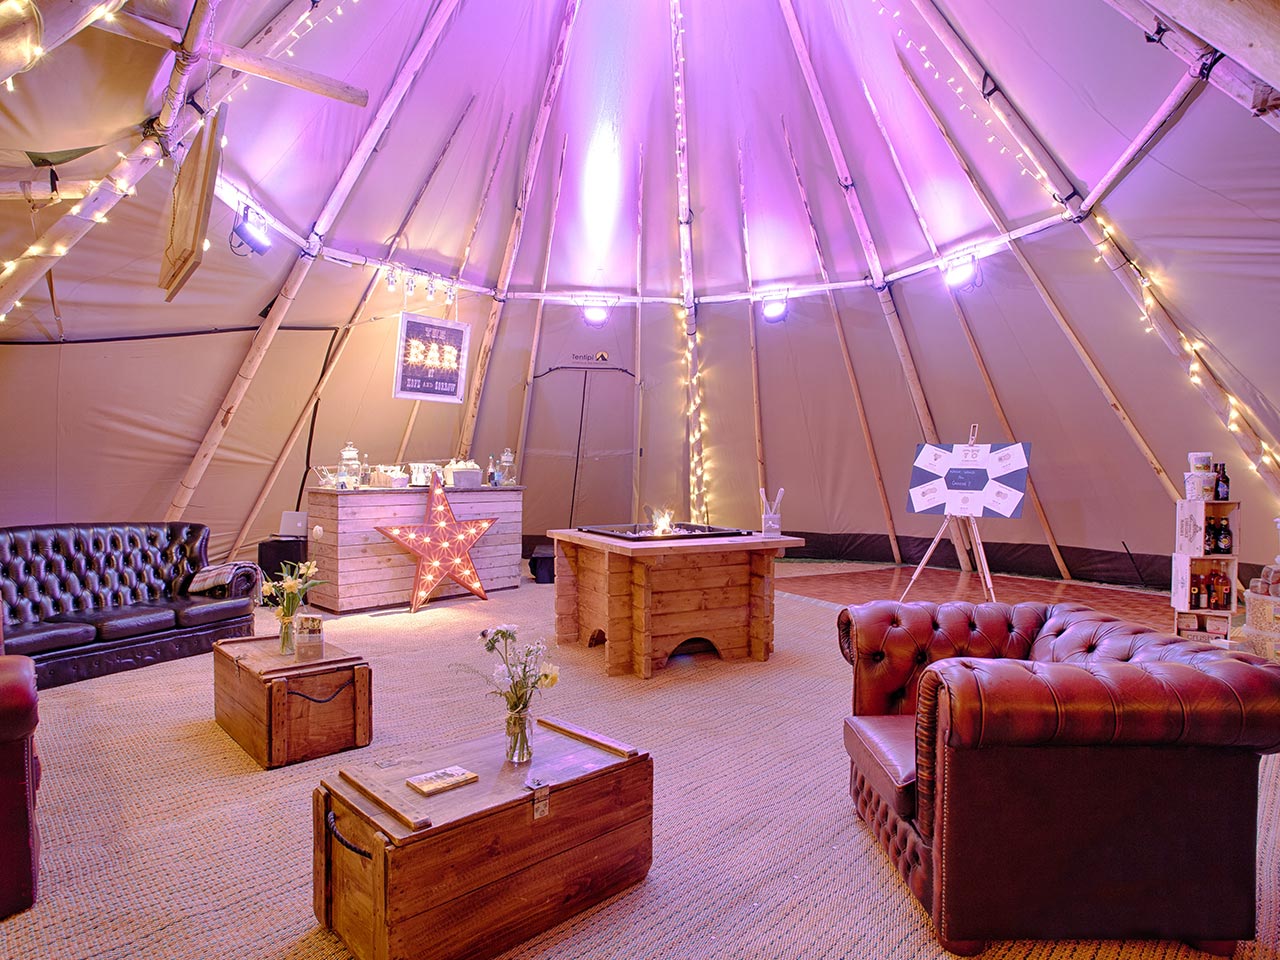 Inside One of Our Tipis